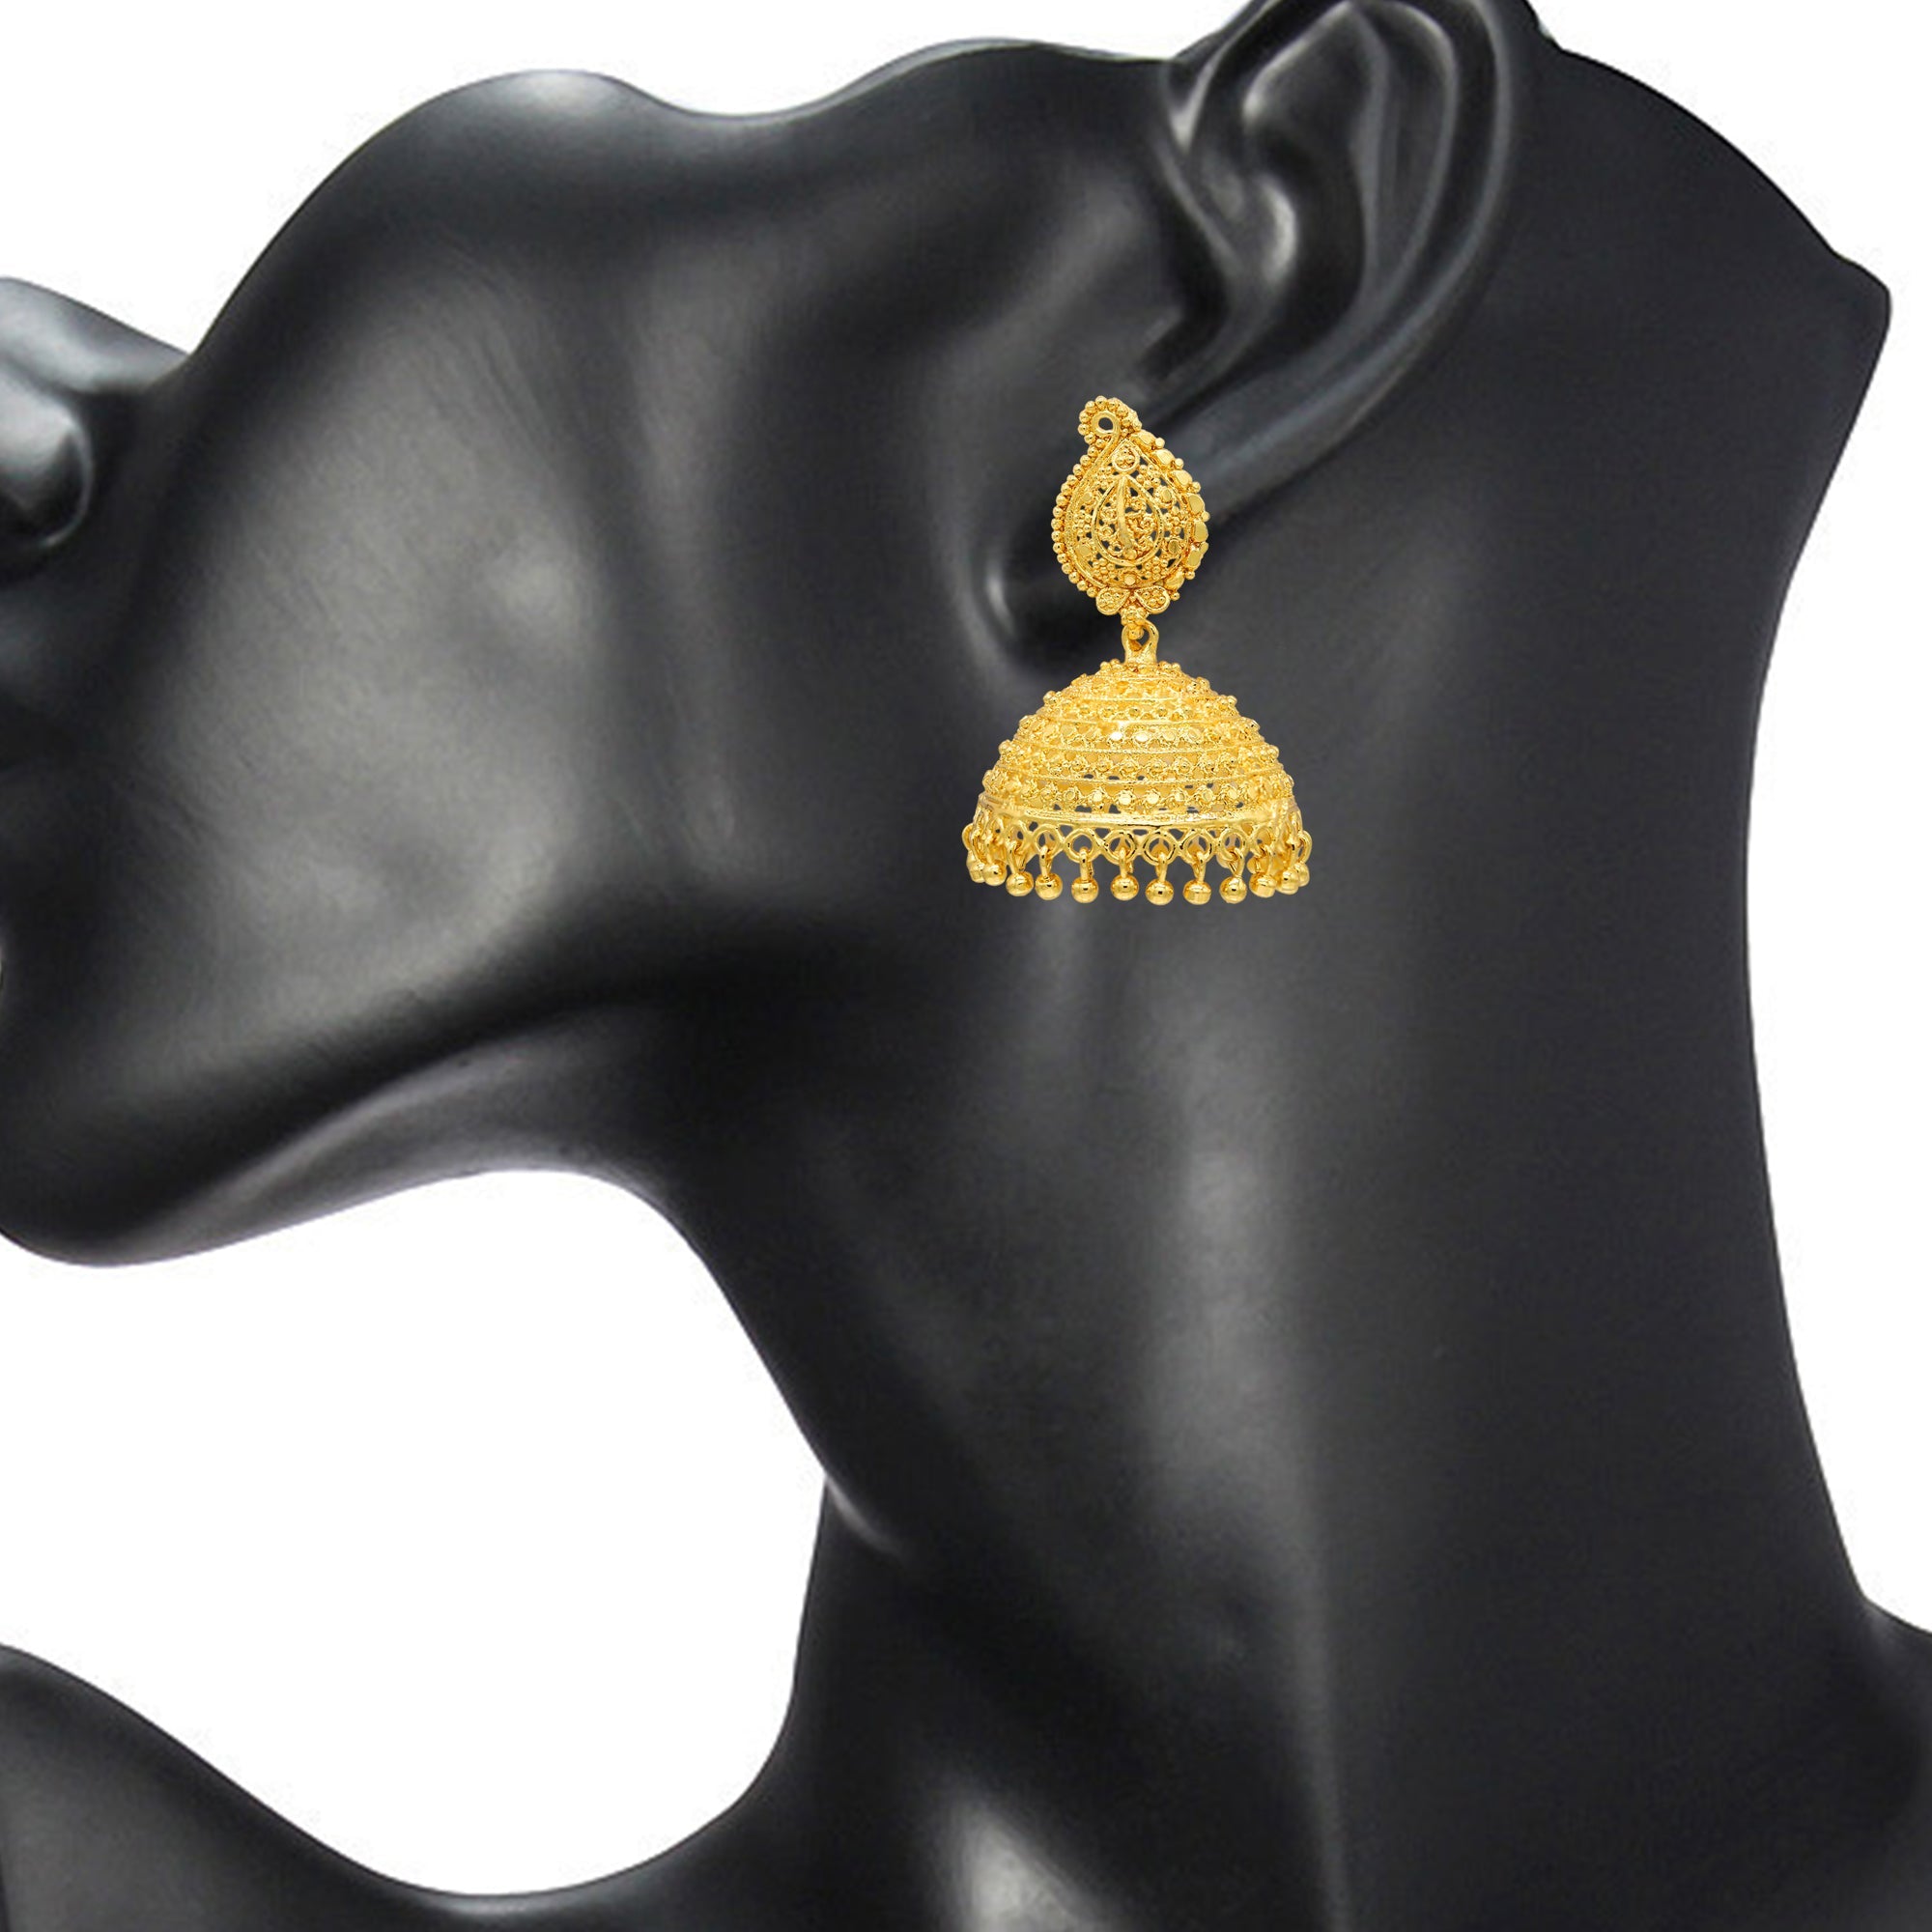 Temple Jewellery - 22K Gold Jhumkas - Gold Dangle Earrings With Cz -  235-GJH1877 in 36.400 Grams